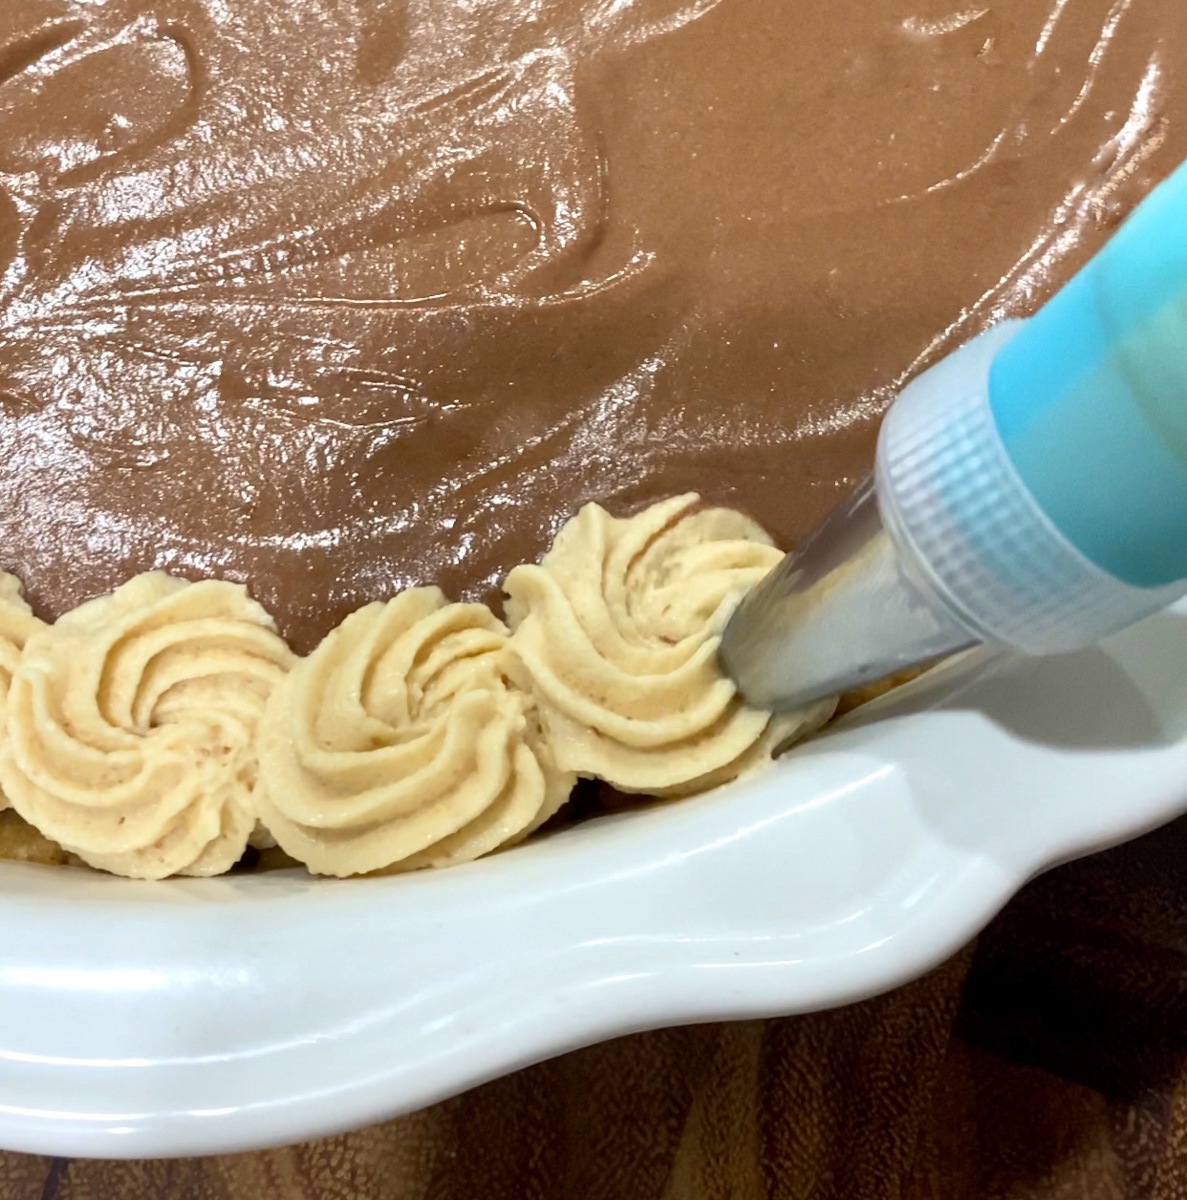 a piping bag piping peanut butter pie filling on to the pie.